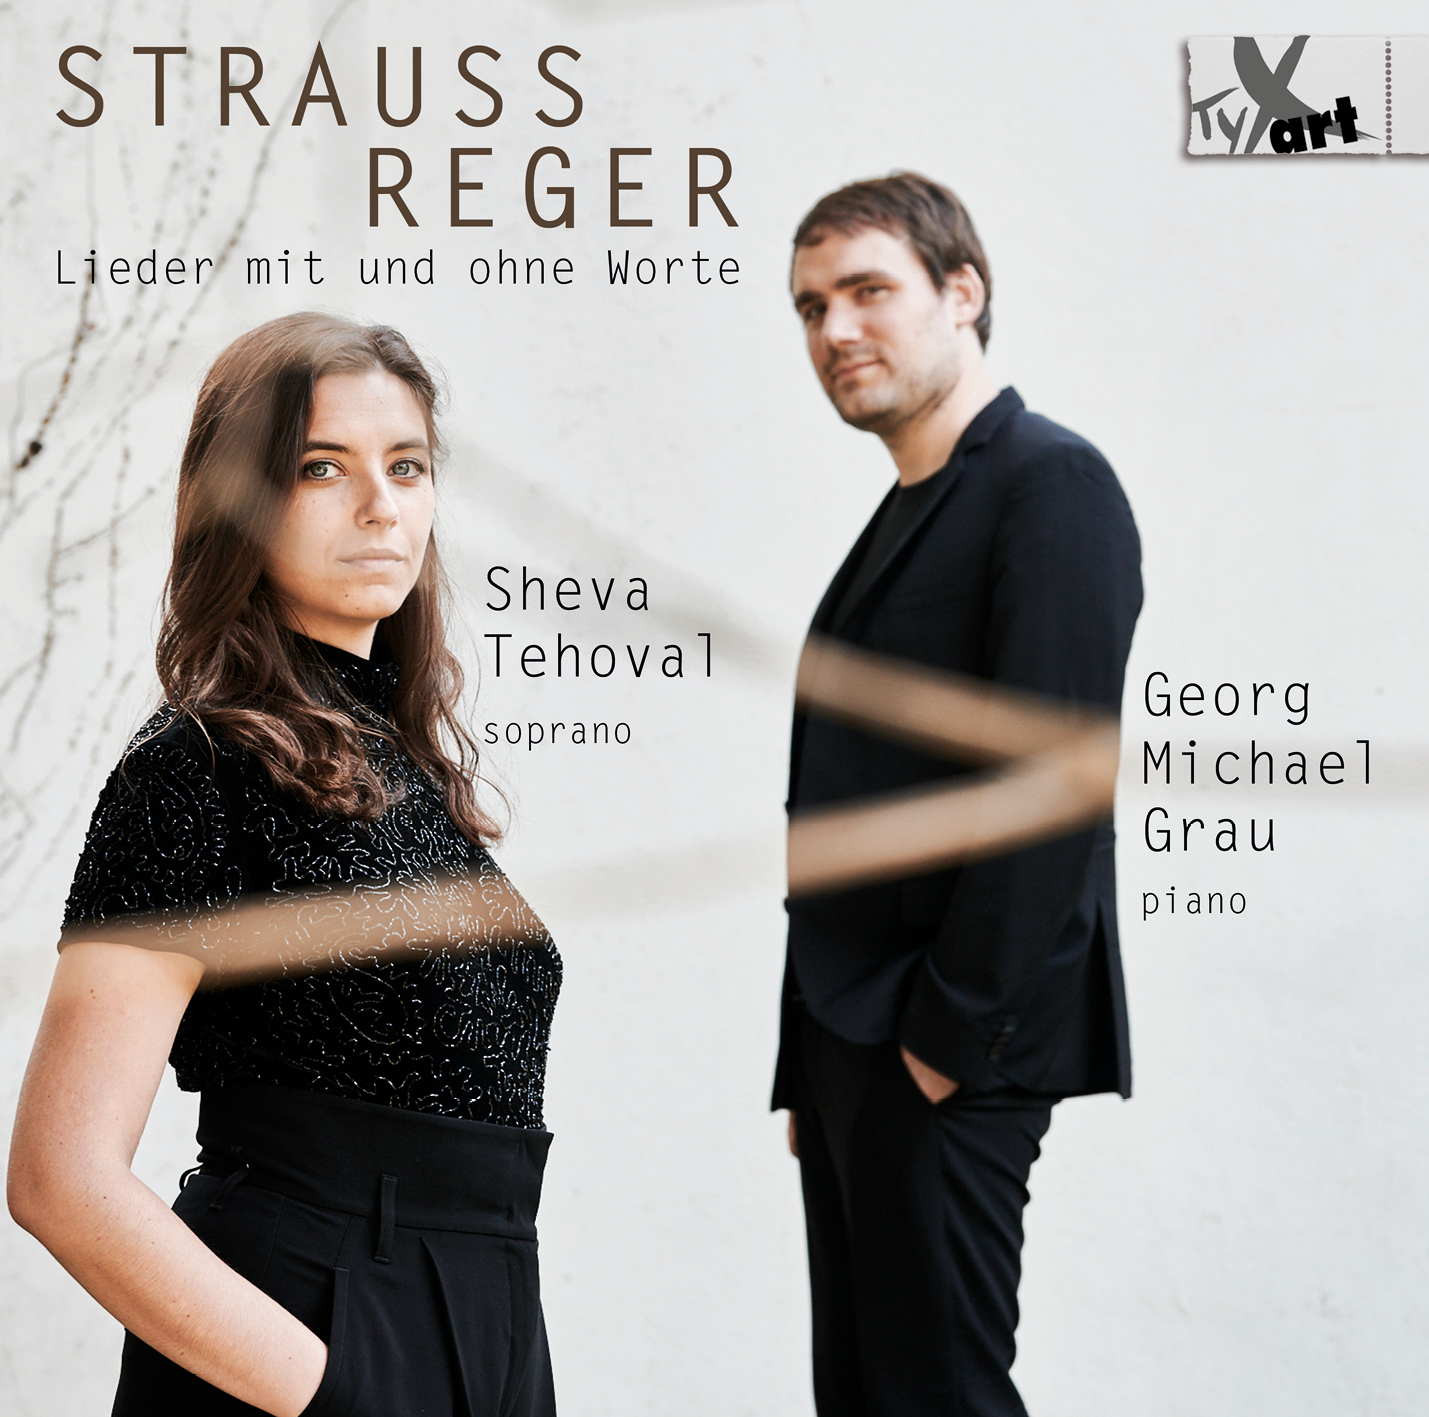 Strauss - Reger - Lieder with and without words - Sheva Tehoval and Georg Michael Grau